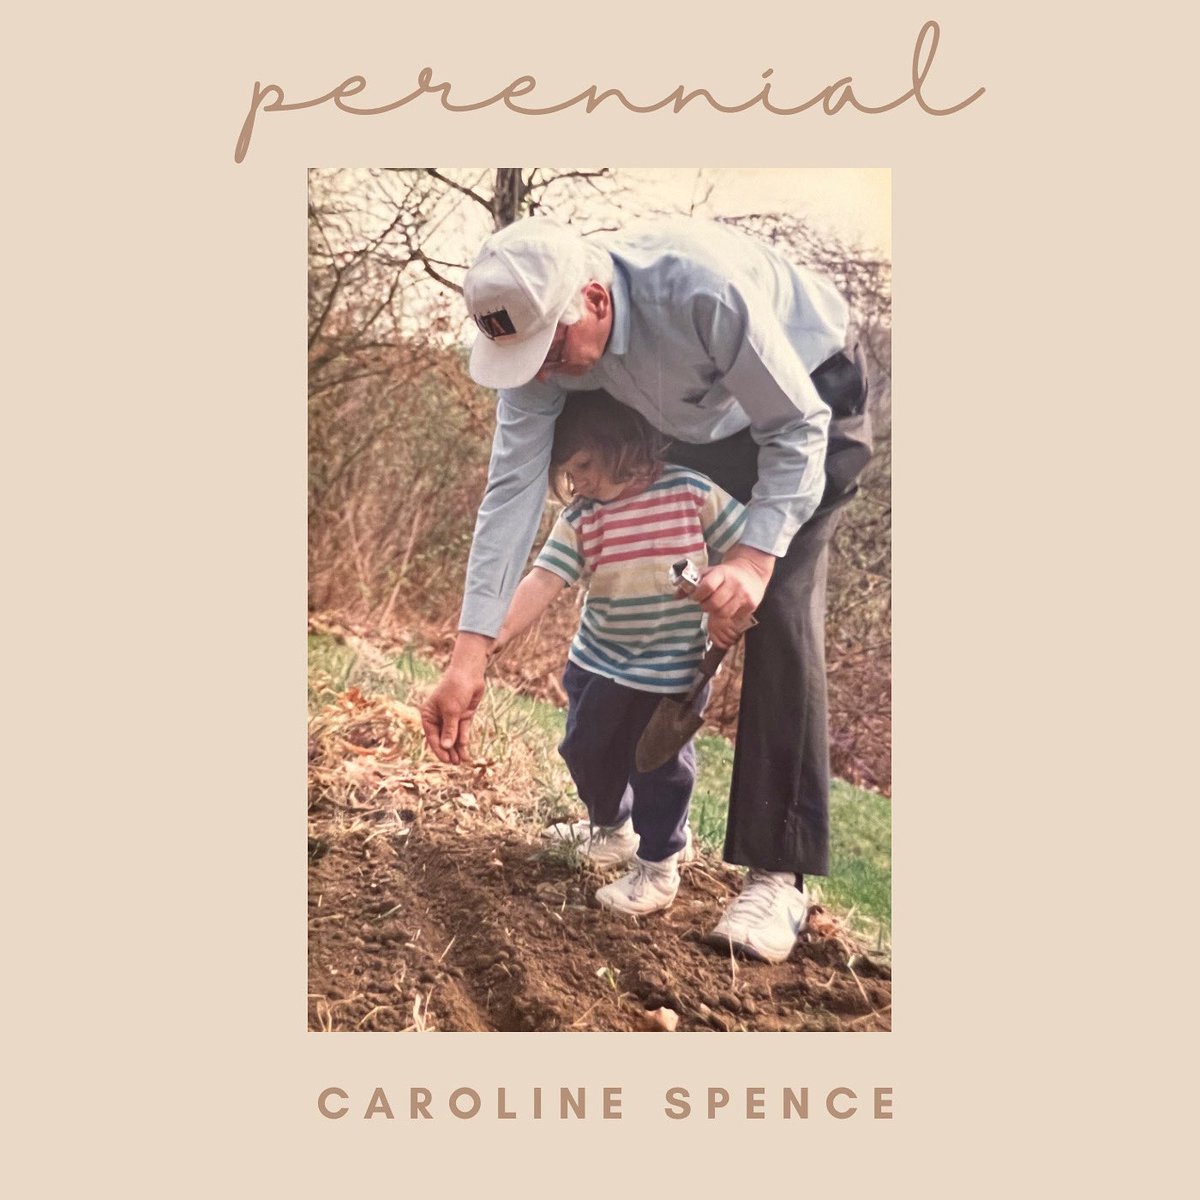 The deluxe version of True North was supposed to come out today but my label told us last night that it’s delayed…luckily I am now able to release music on my own terms so here’s a work-tape of a song I wrote about this season of my life. 🌱carolinespencemusic.bandcamp.com/track/perennial